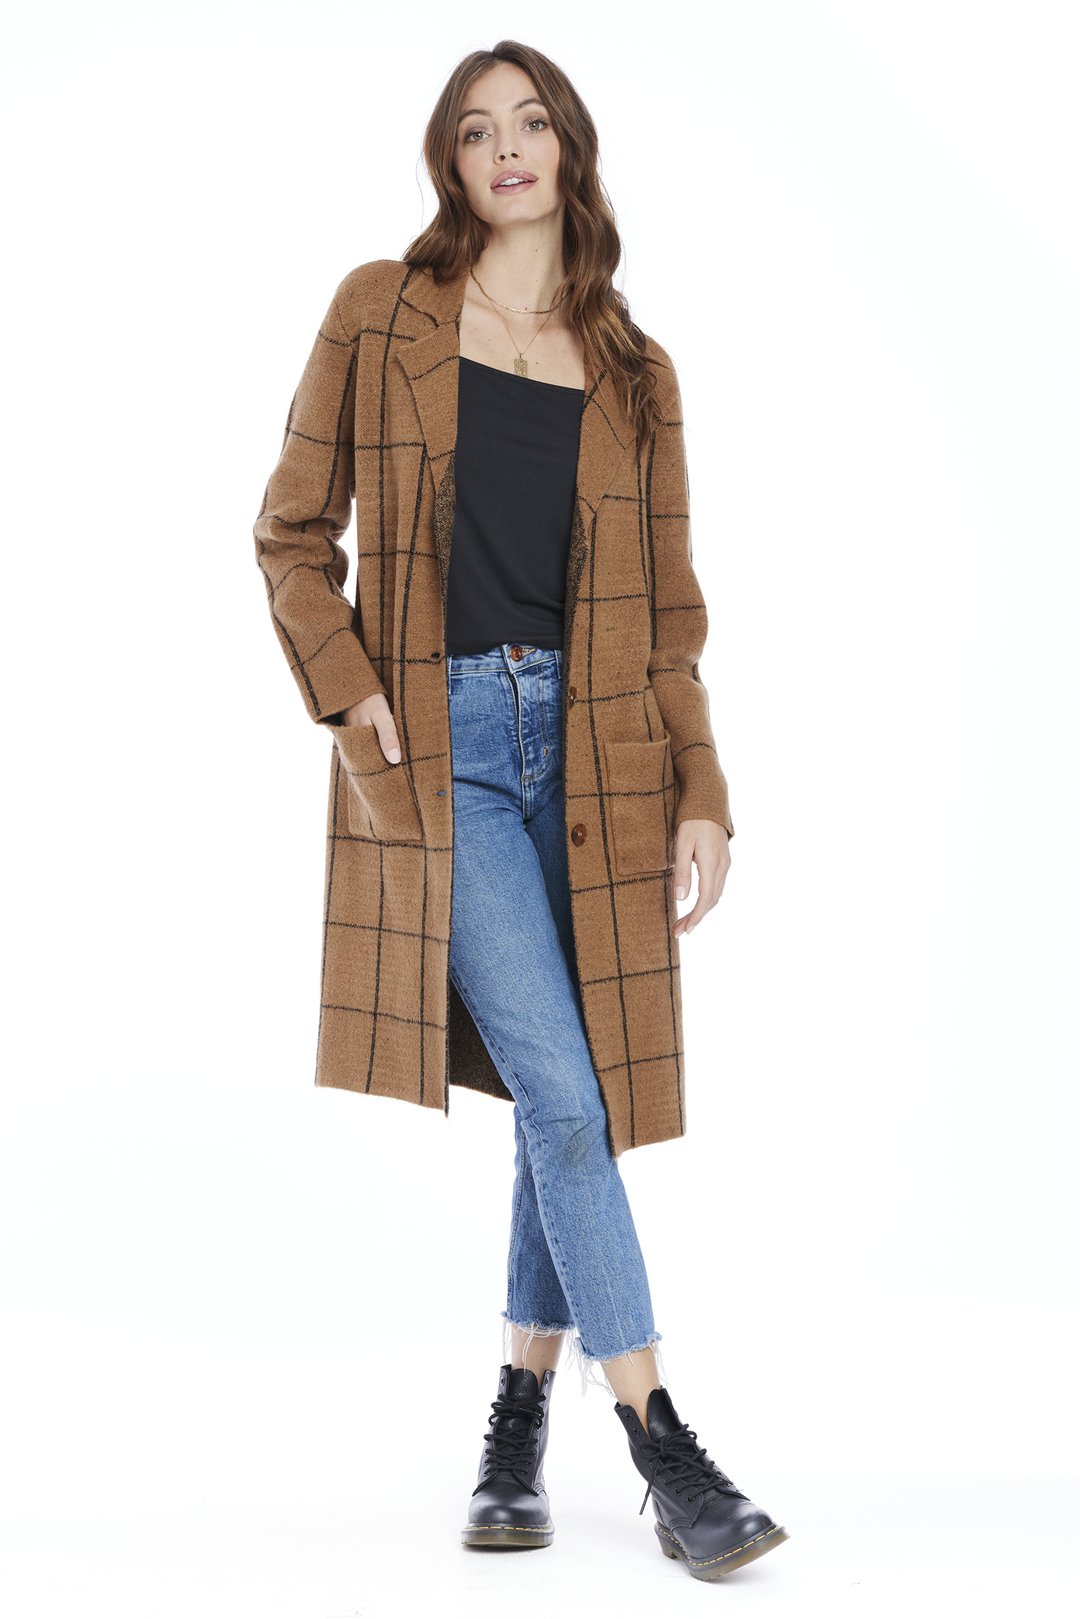 Plaid Long Sweater Jacket | Sienna - Main Image Number 1 of 3